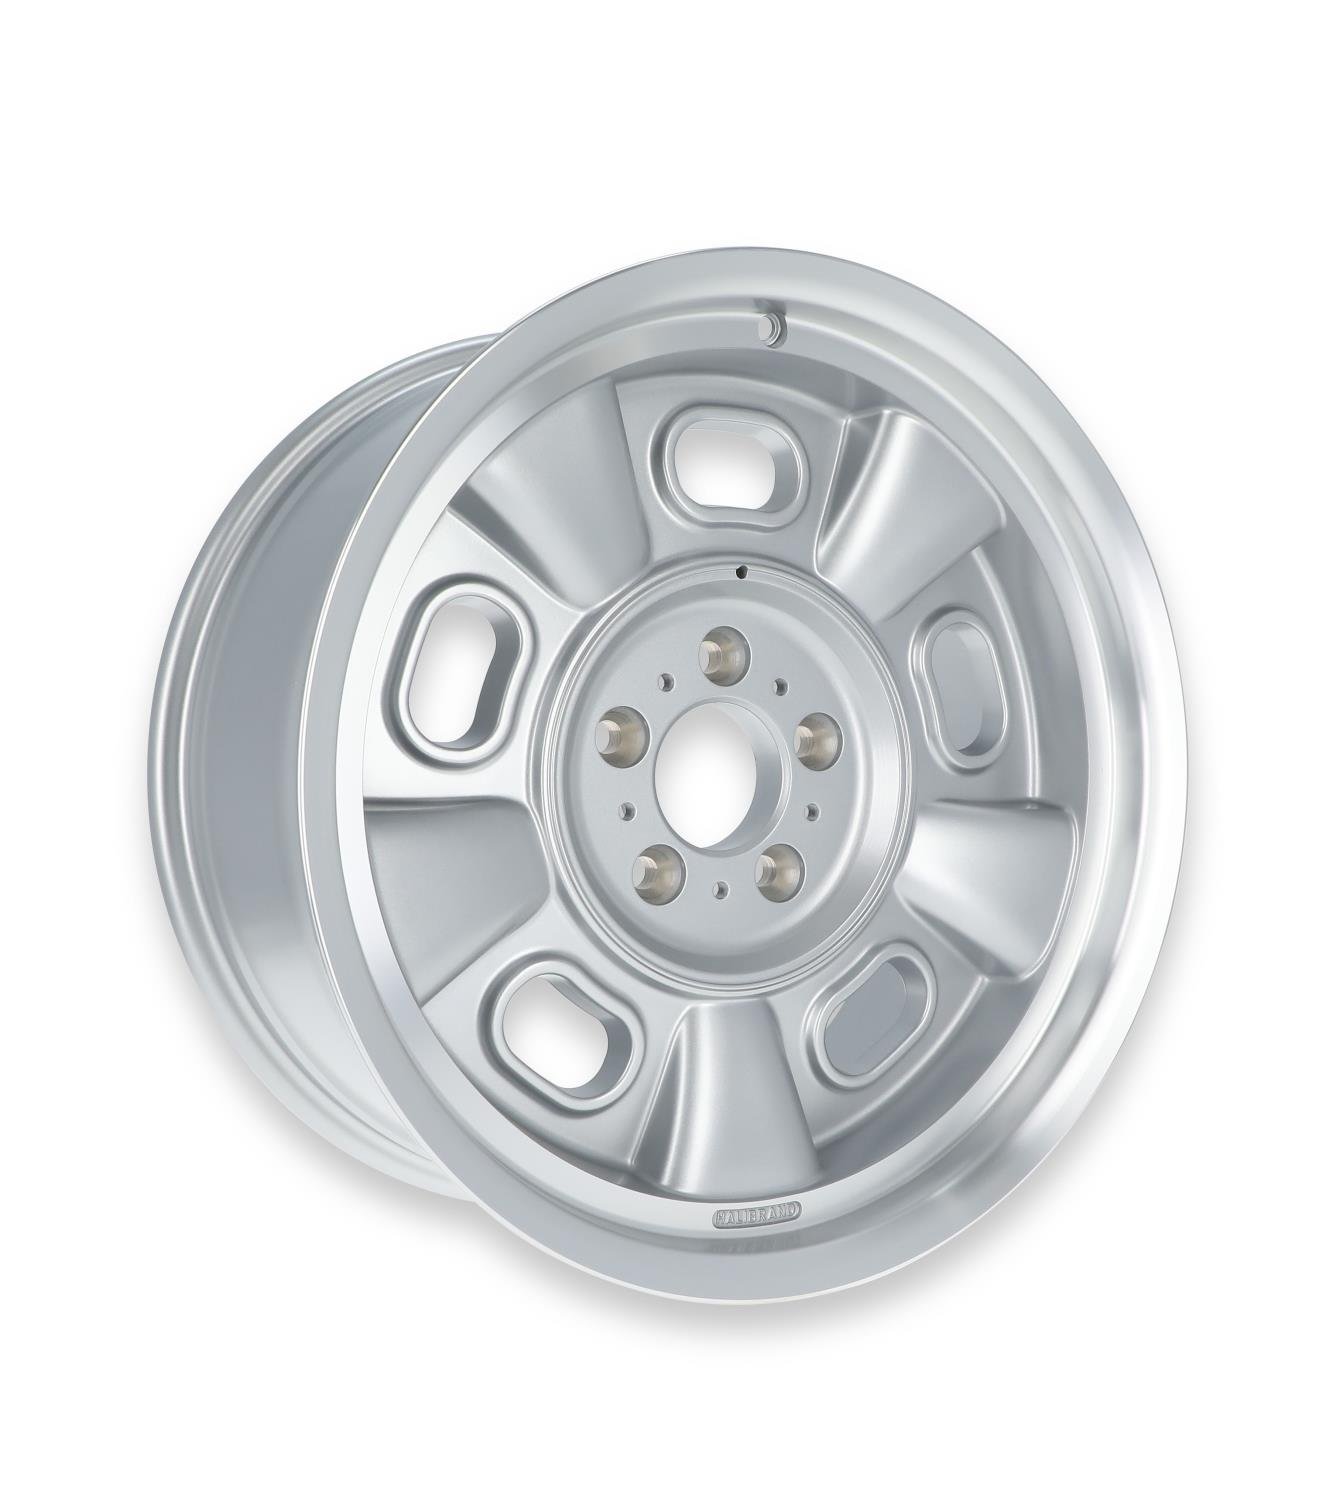 Indy Roadster Wheel, Size: 19x8.5